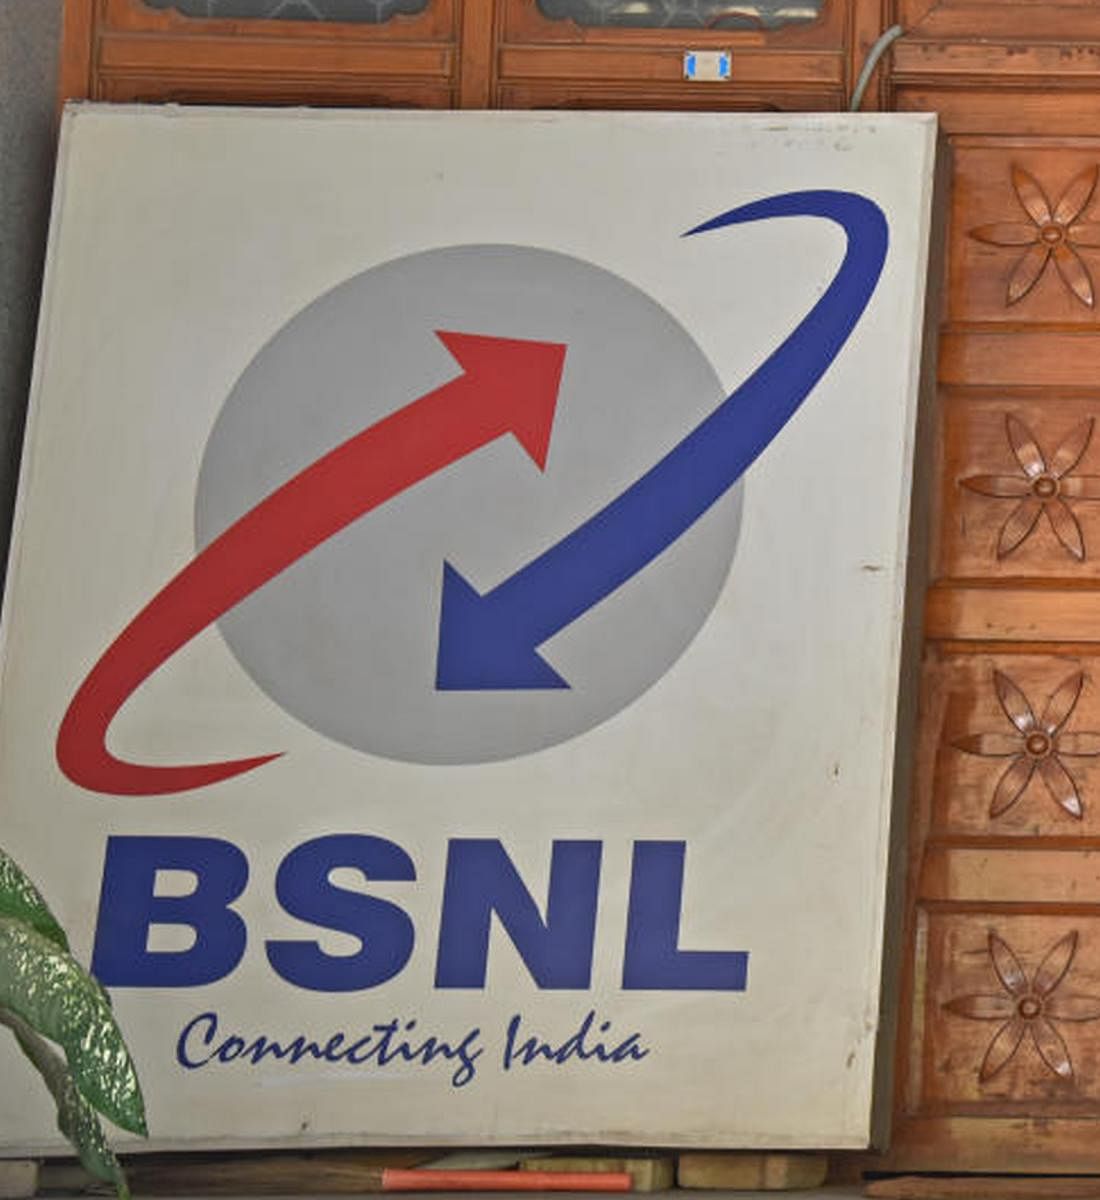 Sterlite Tech says BSNL's outstanding dues now below Rs 100 cr, expects substantial settlement this year